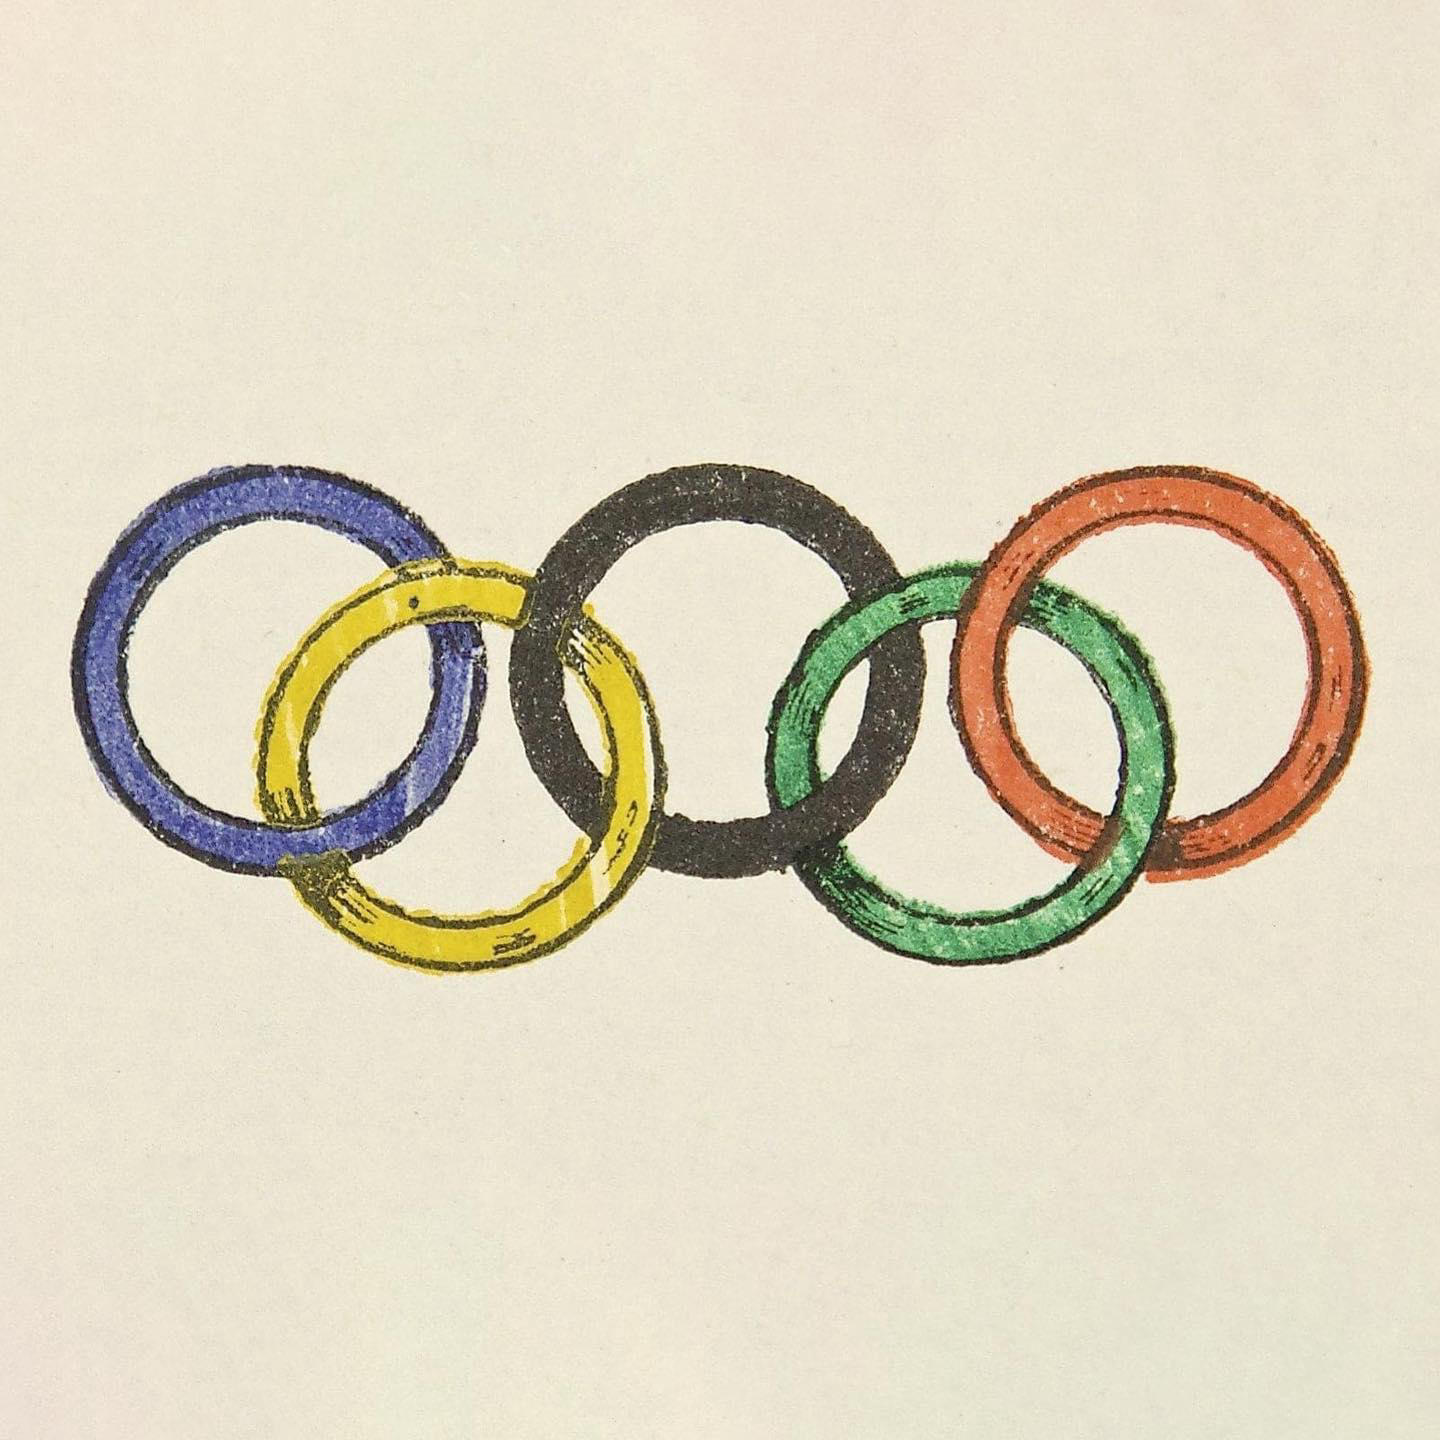 The Olympic Games - In 1913, the founding father of the Modern Olympic Games, Pierre de Coubertin de